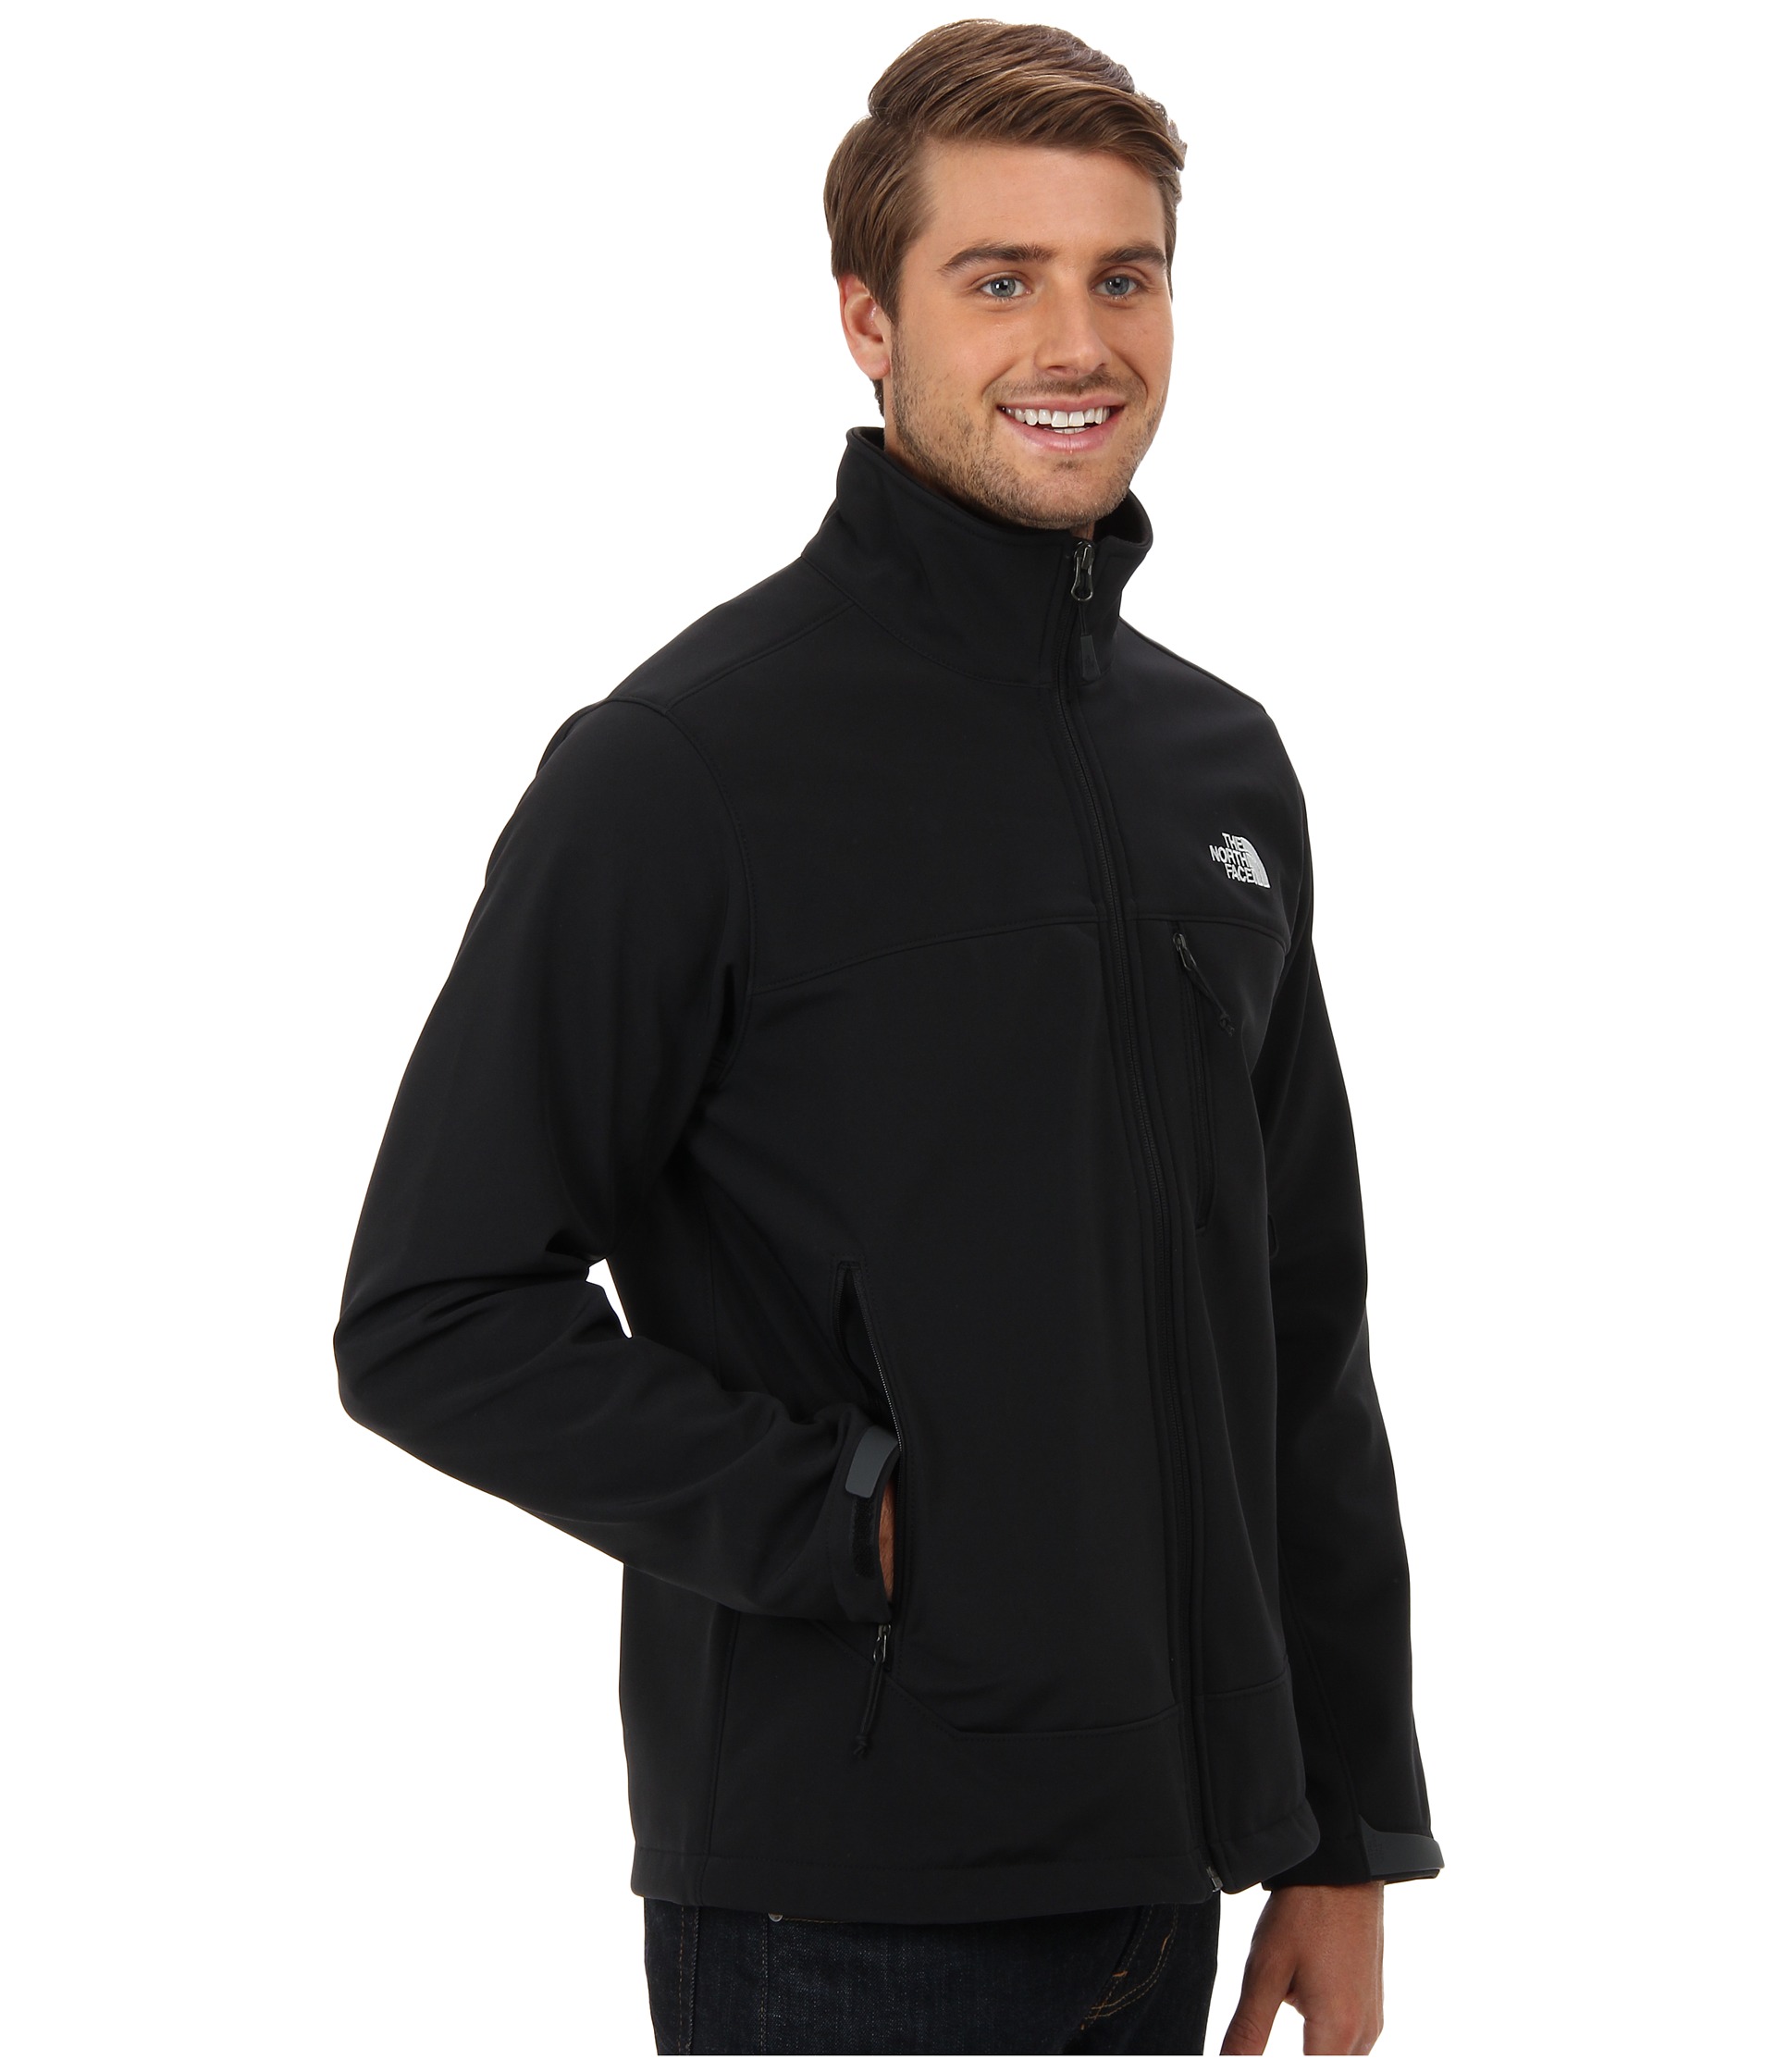 The North Face Apex Bionic Jacket - Zappos.com Free Shipping BOTH Ways